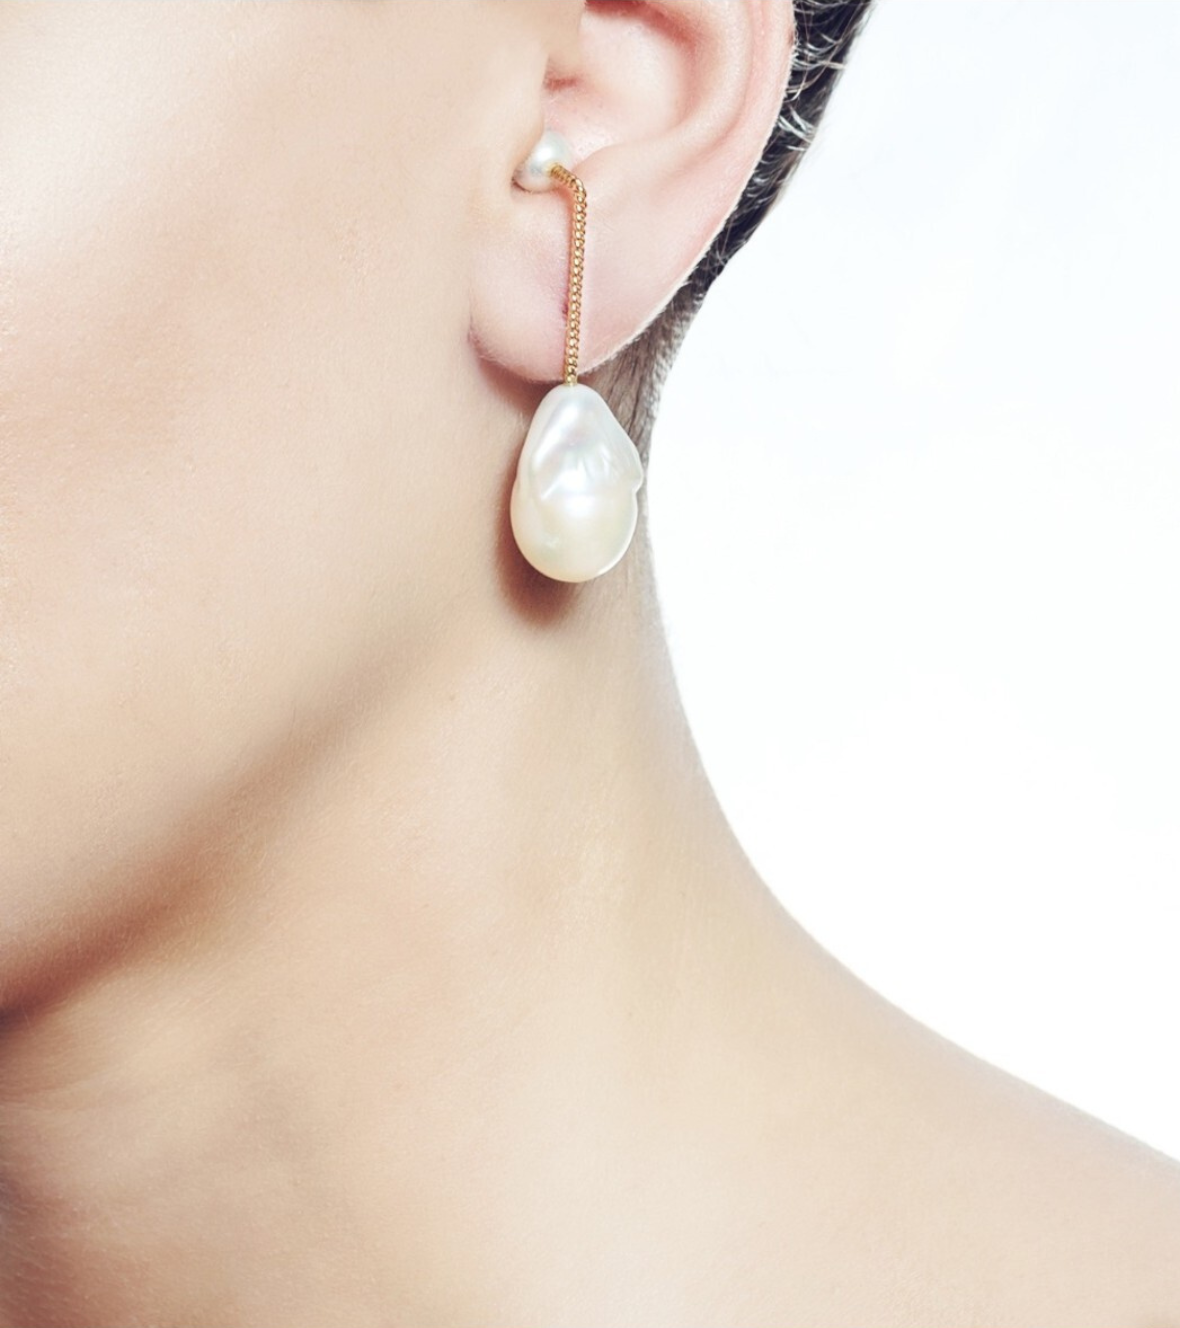 Basic Stick Earring with pearls